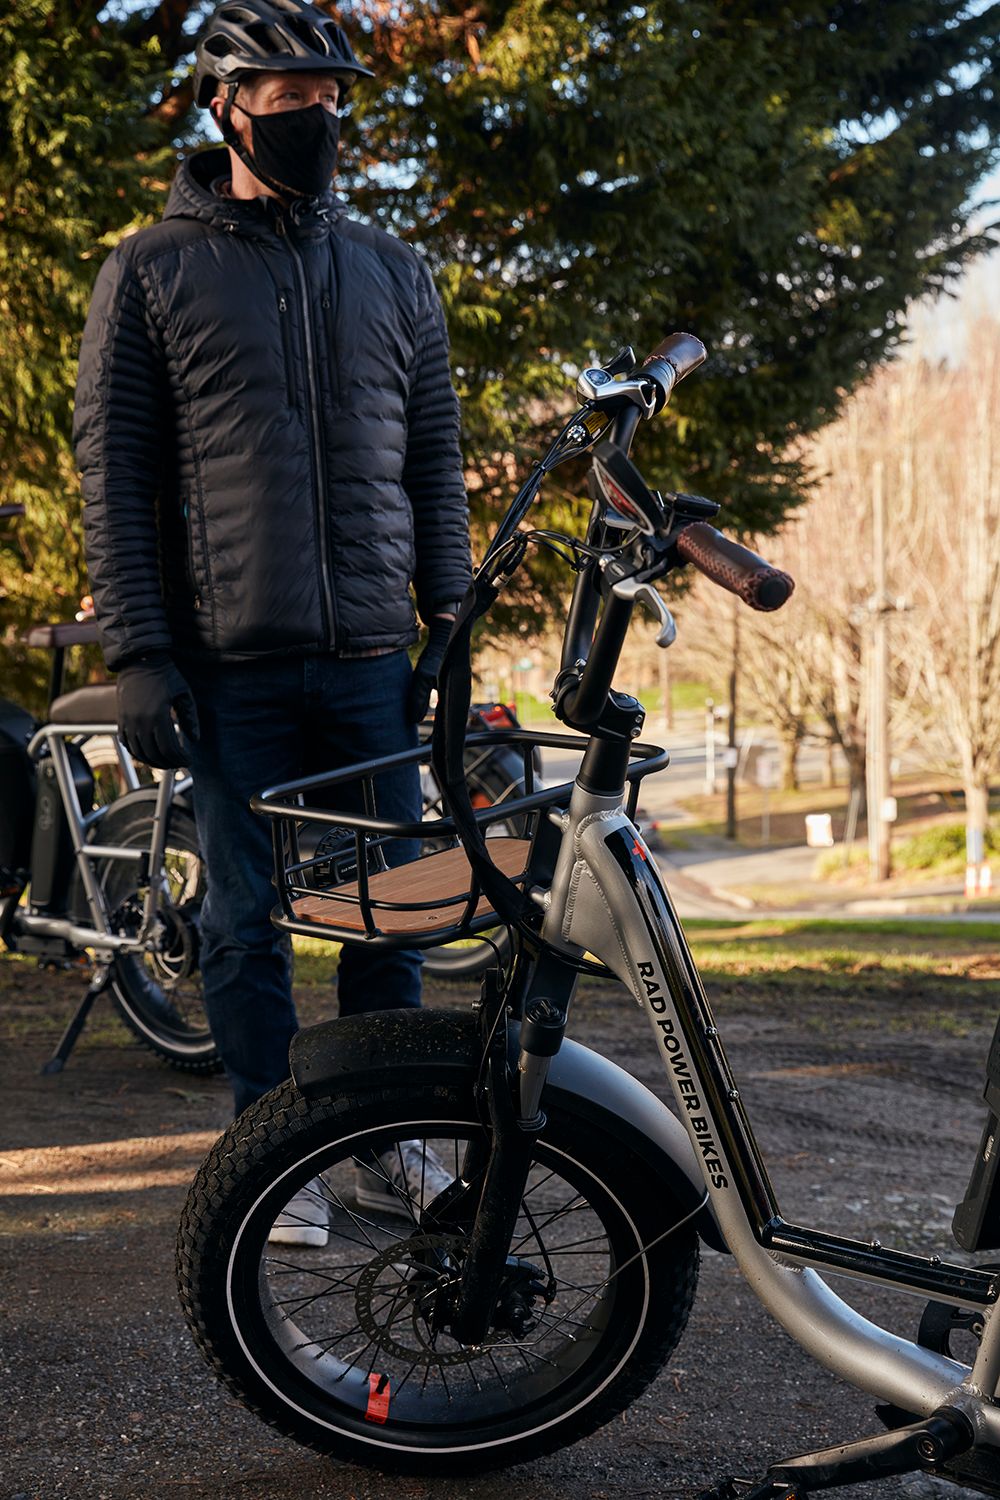 Man stands next to his ebike and wears jacket, gloves, helmet and face covering.